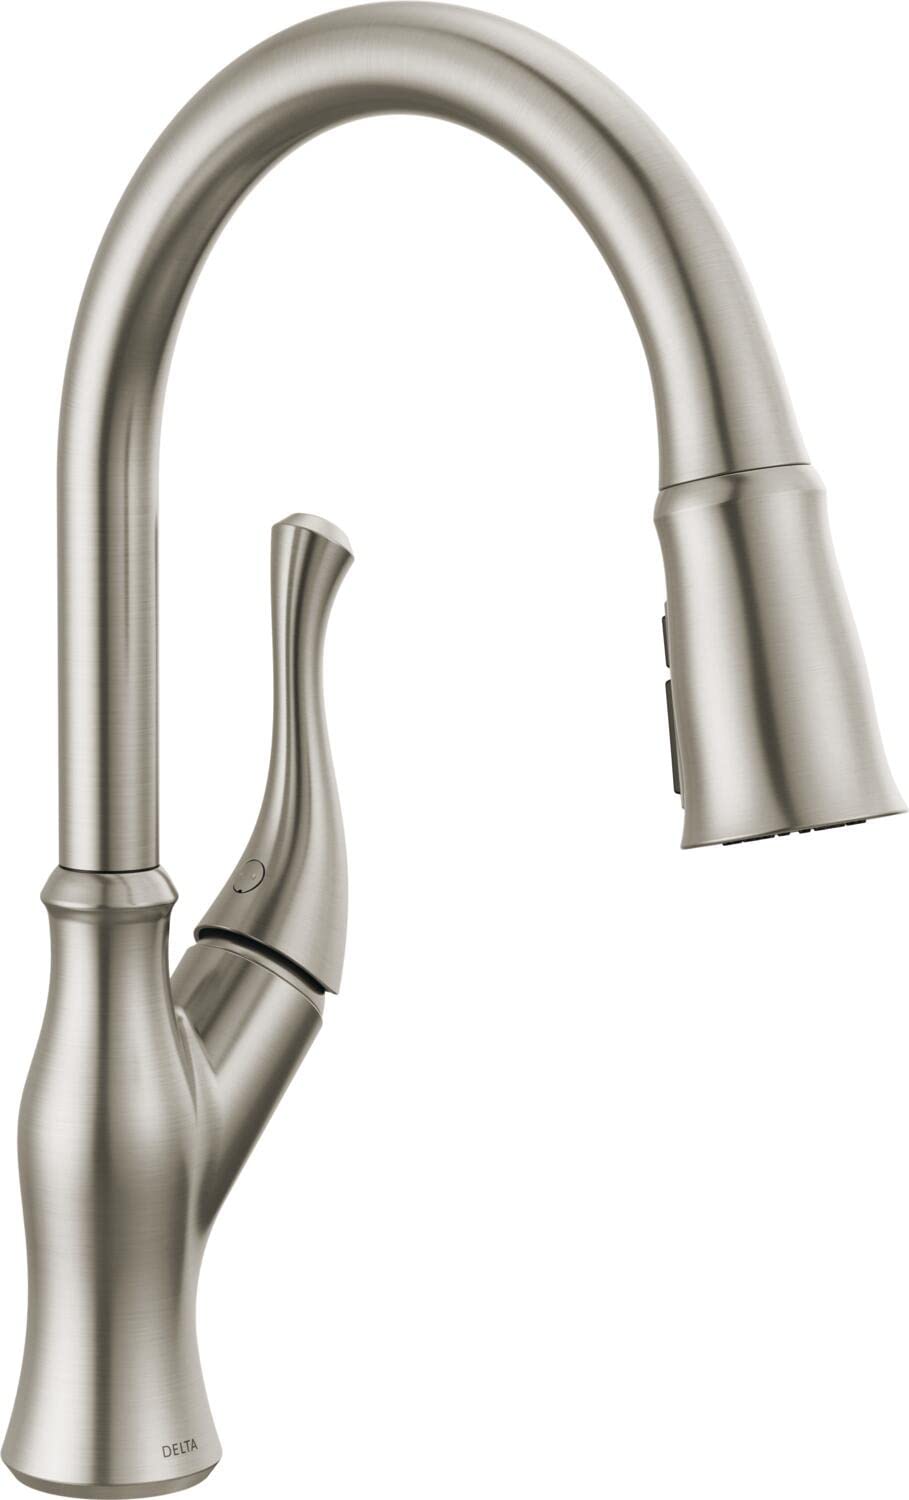 Delta Ophelia Kitchen Faucet with Pull Down Sprayer, Magnetic Docking, Any Color $169.99